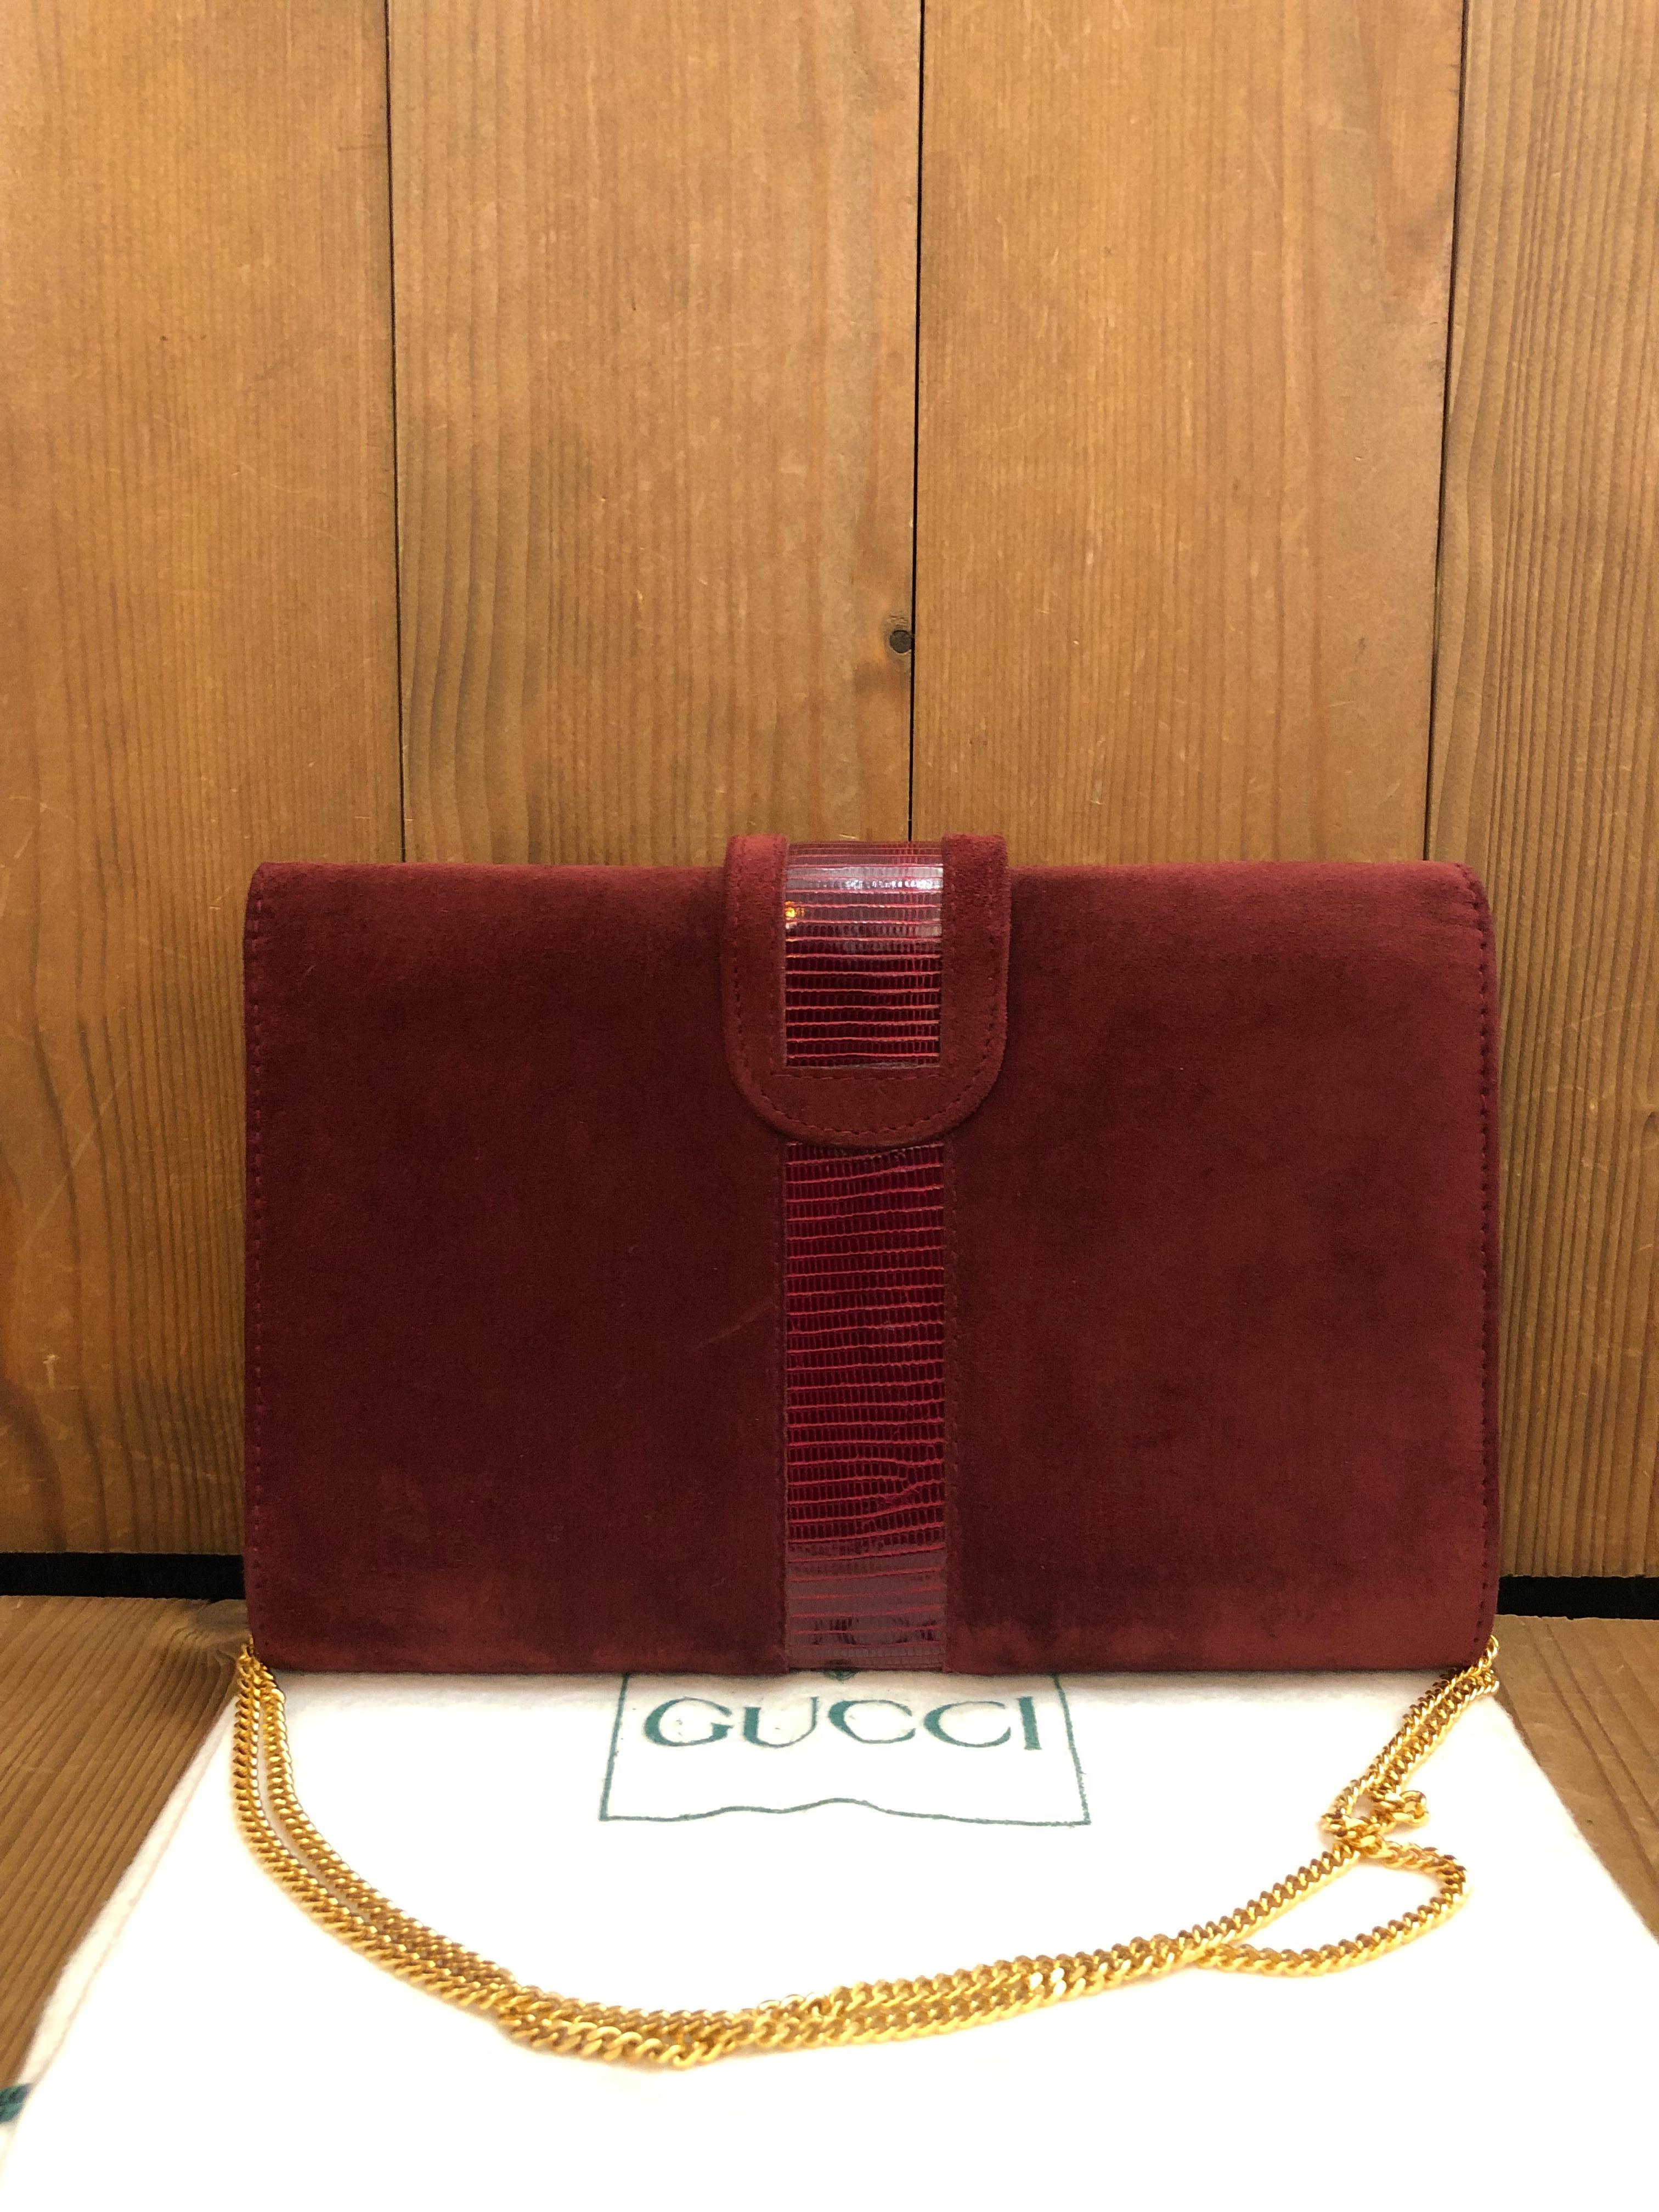 This vintage GUCCI small chain bag clutch is crafted of nubuck in burgundy and trimmed with embossed patent leather featuring gold toned hardware. Font flap snap closure opens to a leather interior in burgundy featuring two patch pockets. It is the